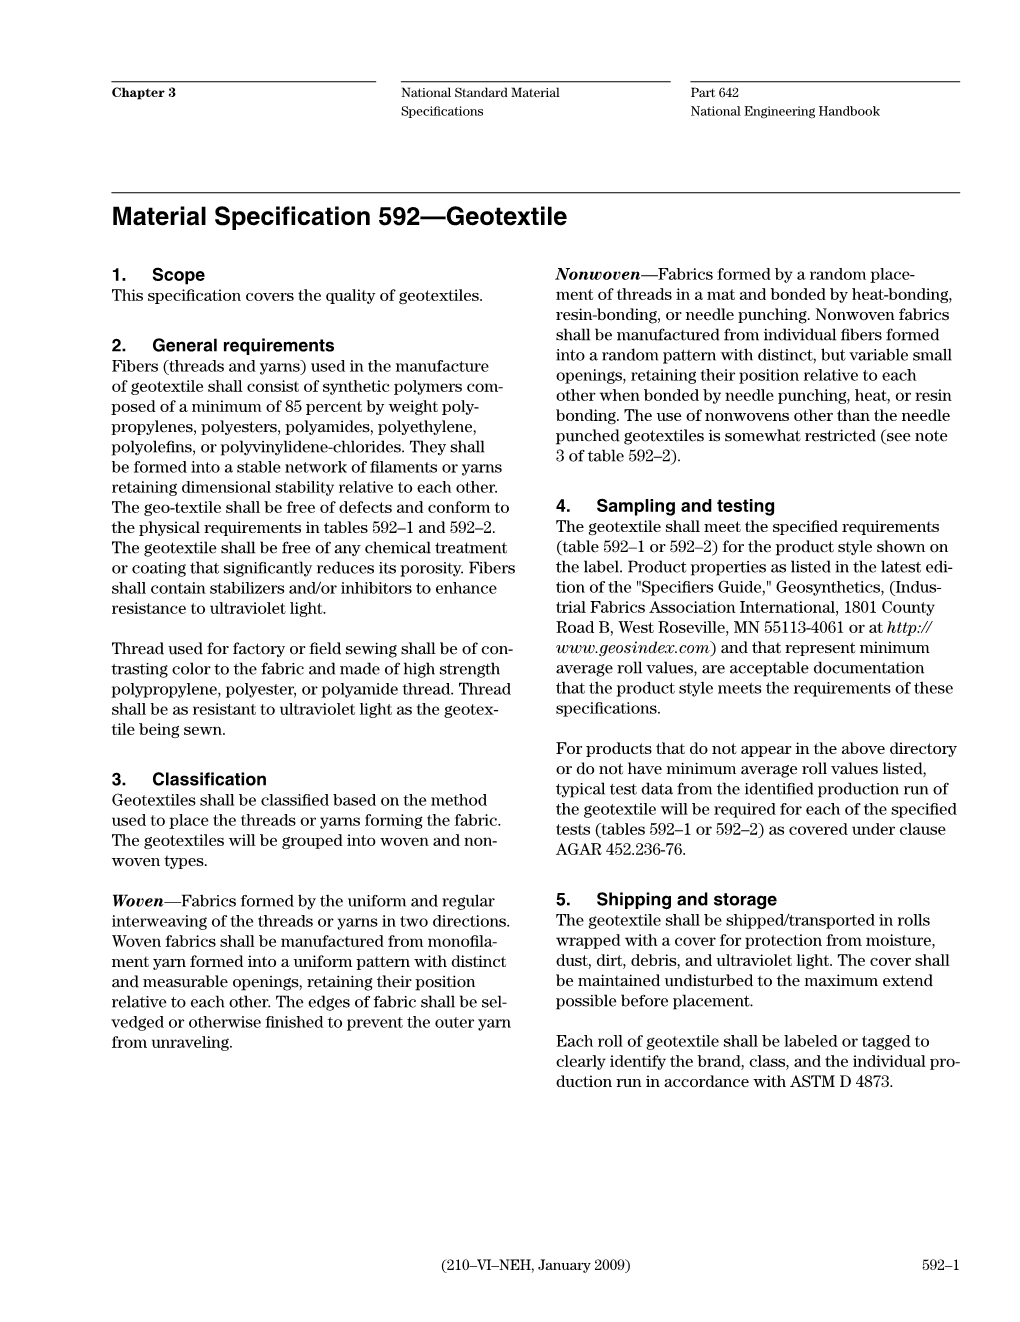 Material Specification 592—Geotextile